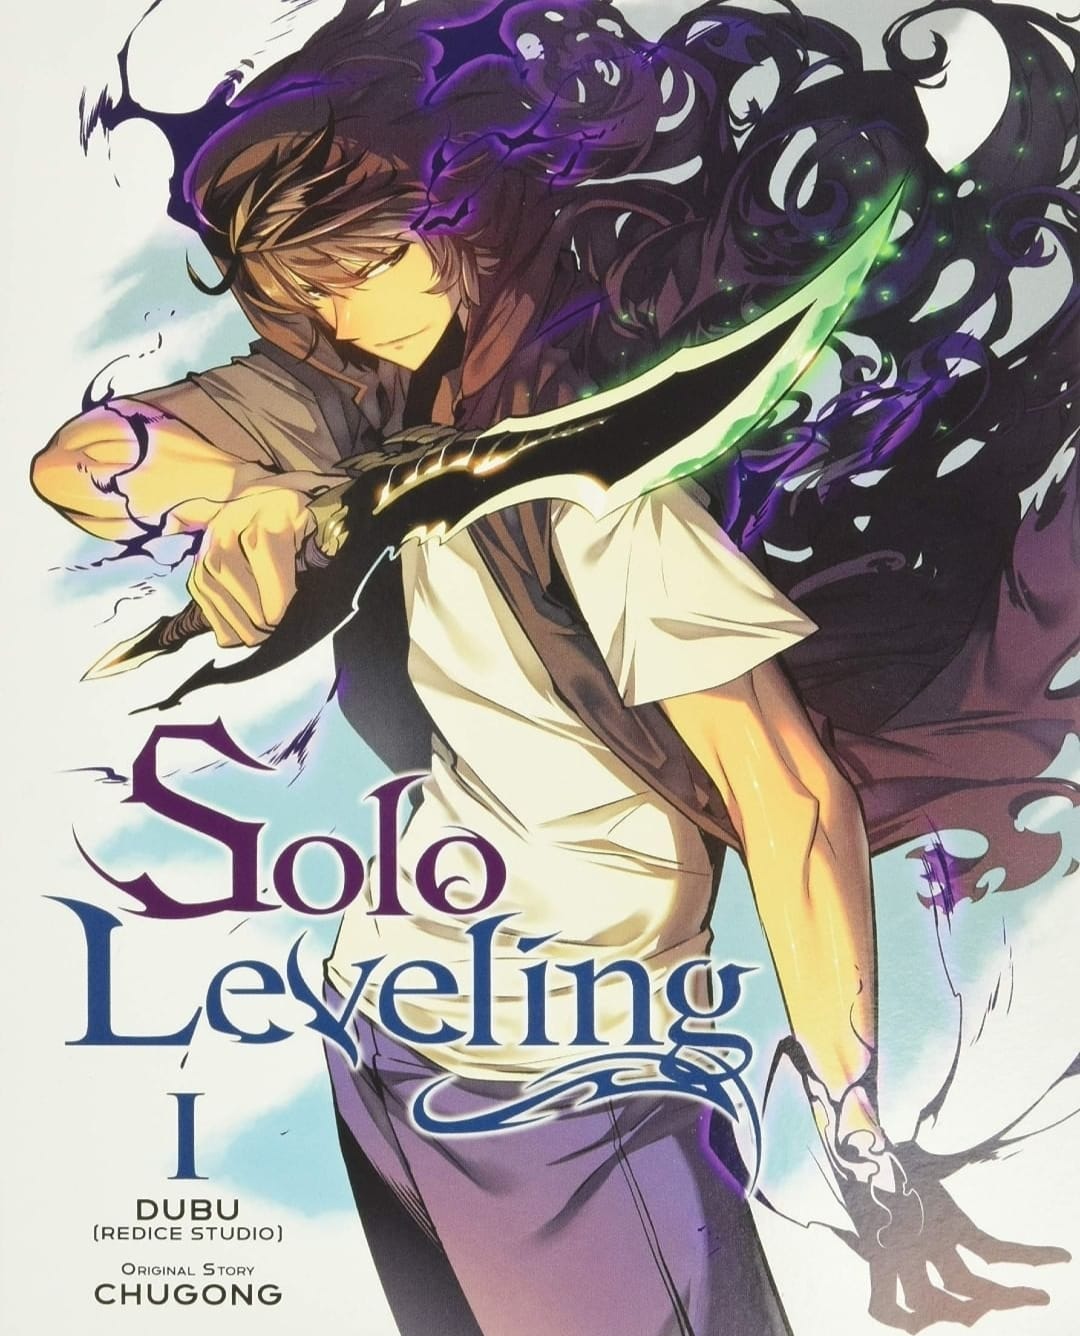 Read Solo Leveling latest news on Its Anime & Side story